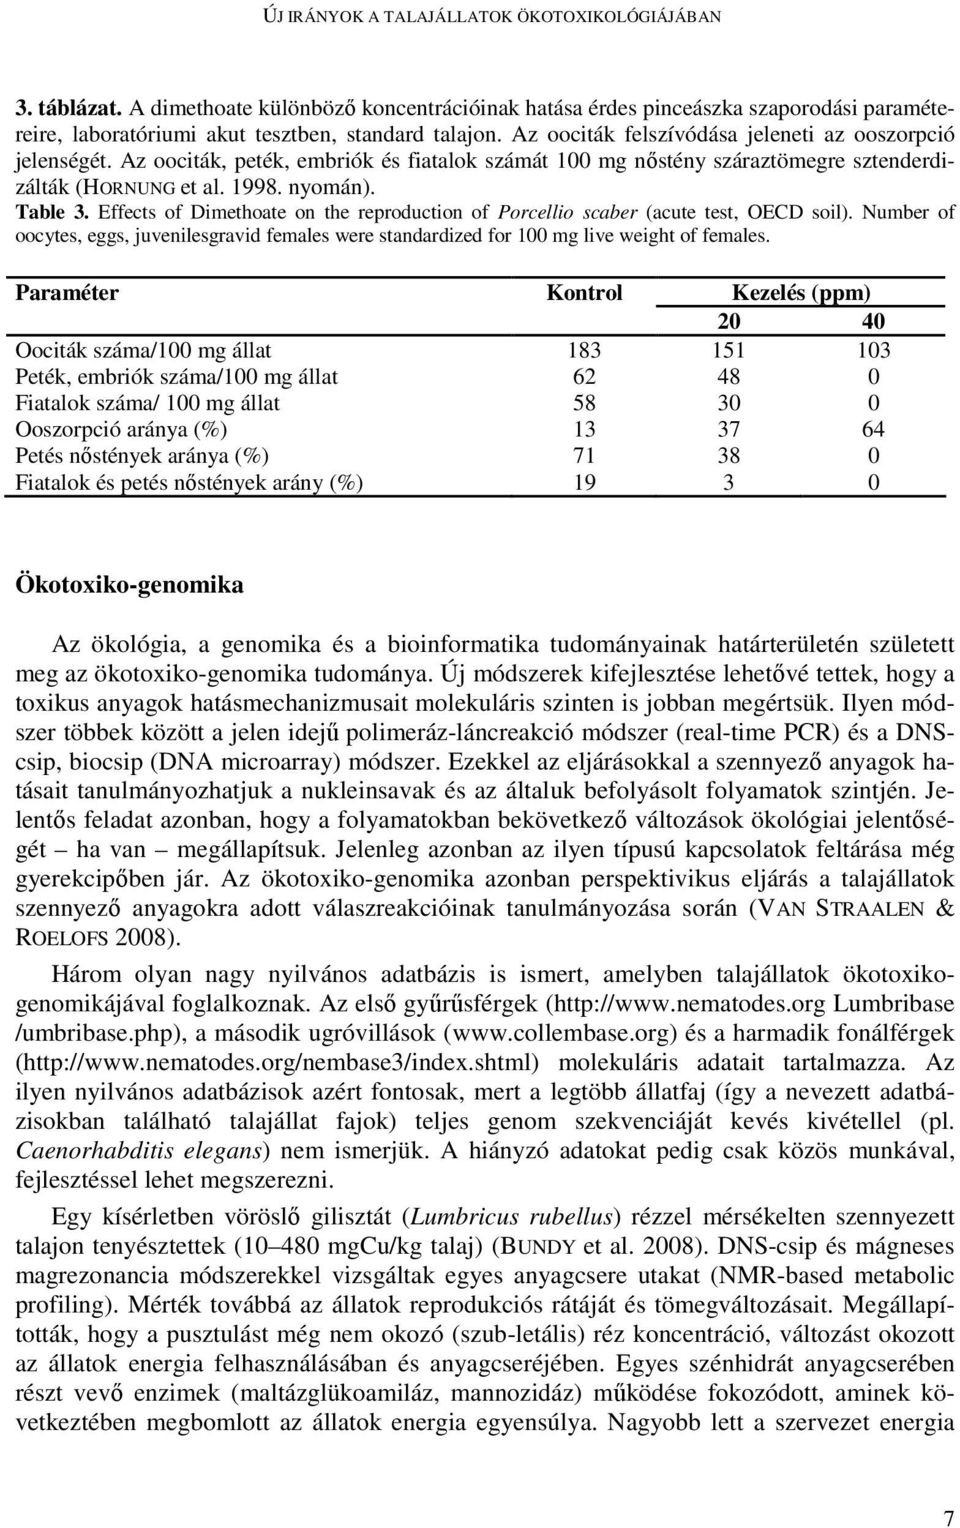 Effects of Dimethoate on the reproduction of Porcellio scaber (acute test, OECD soil). Number of oocytes, eggs, juvenilesgravid females were standardized for 100 mg live weight of females.